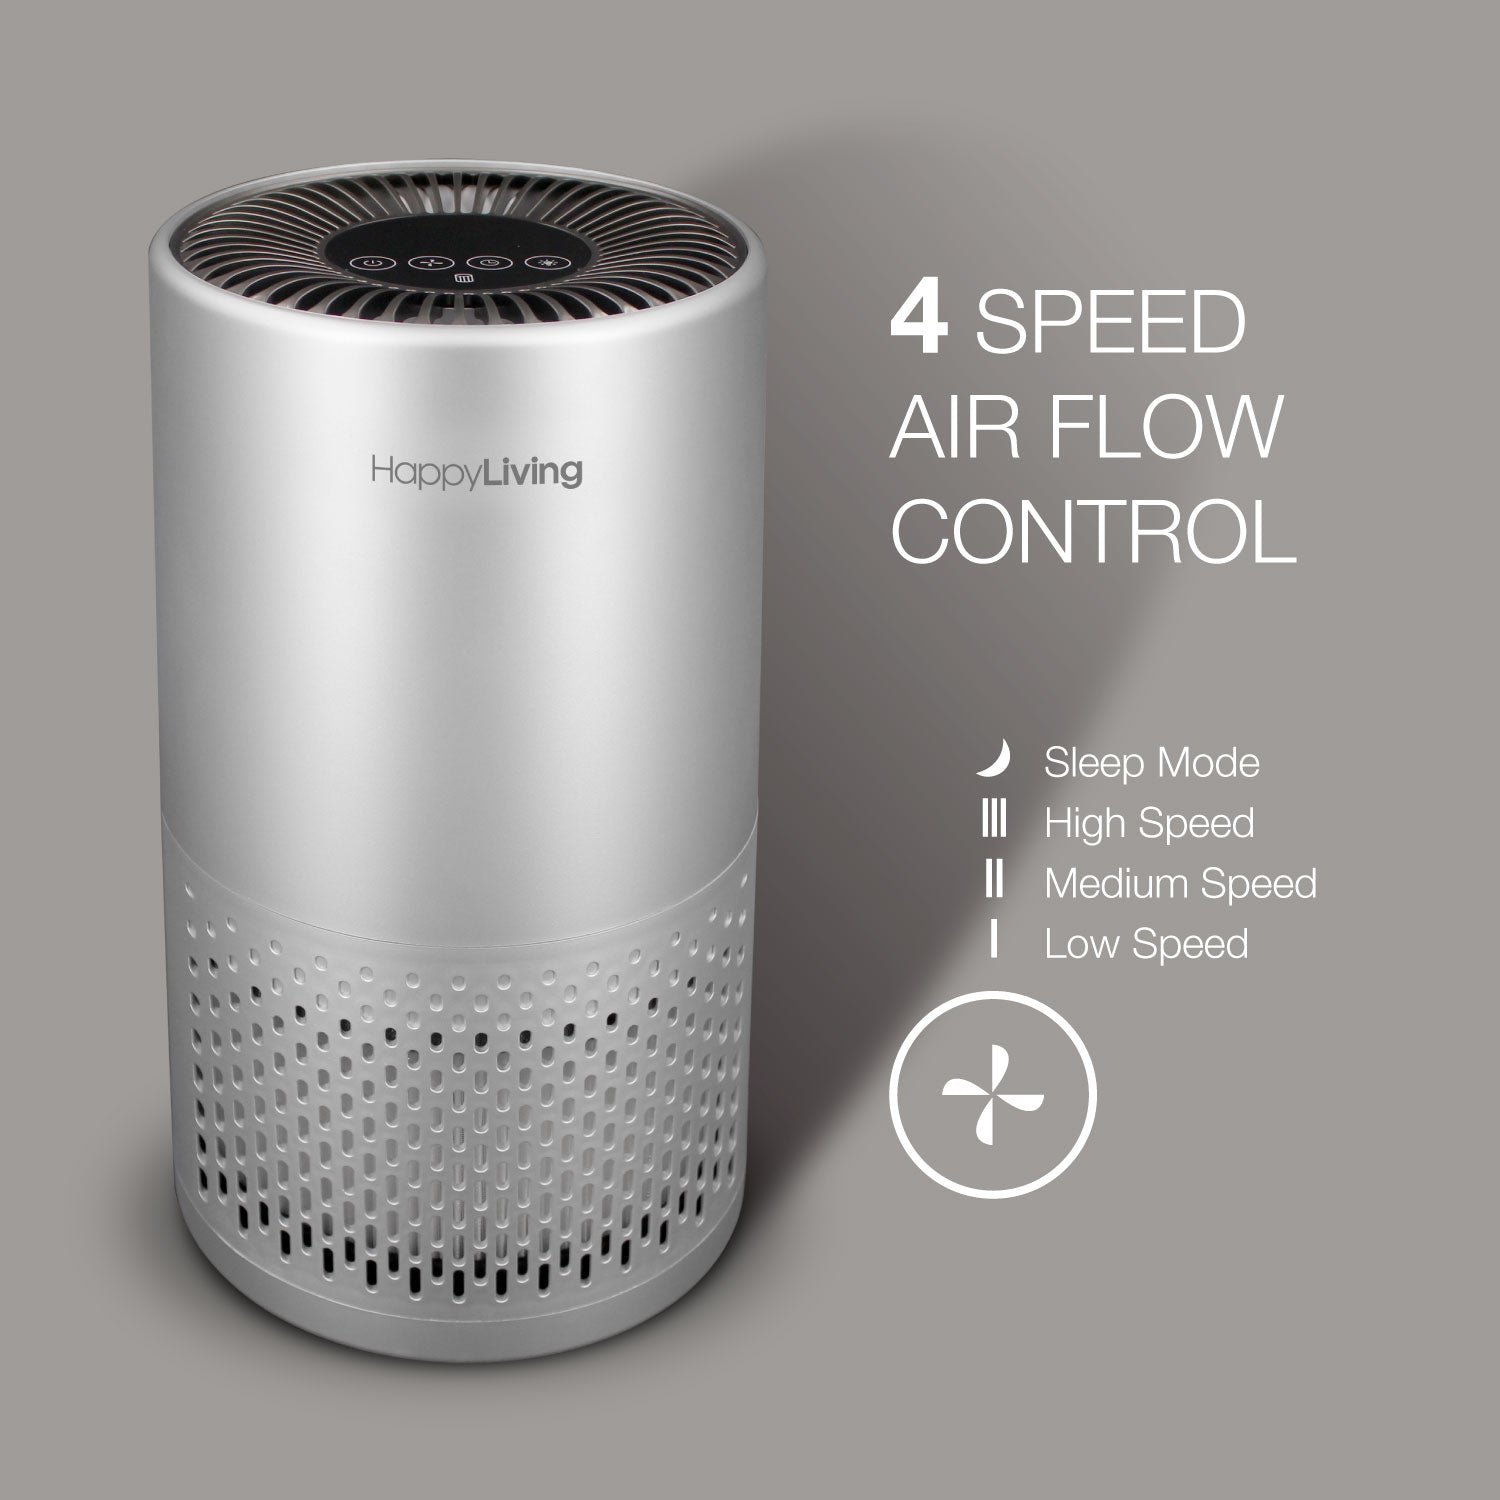 An image of the 4 speed air flow control on the air purifier.